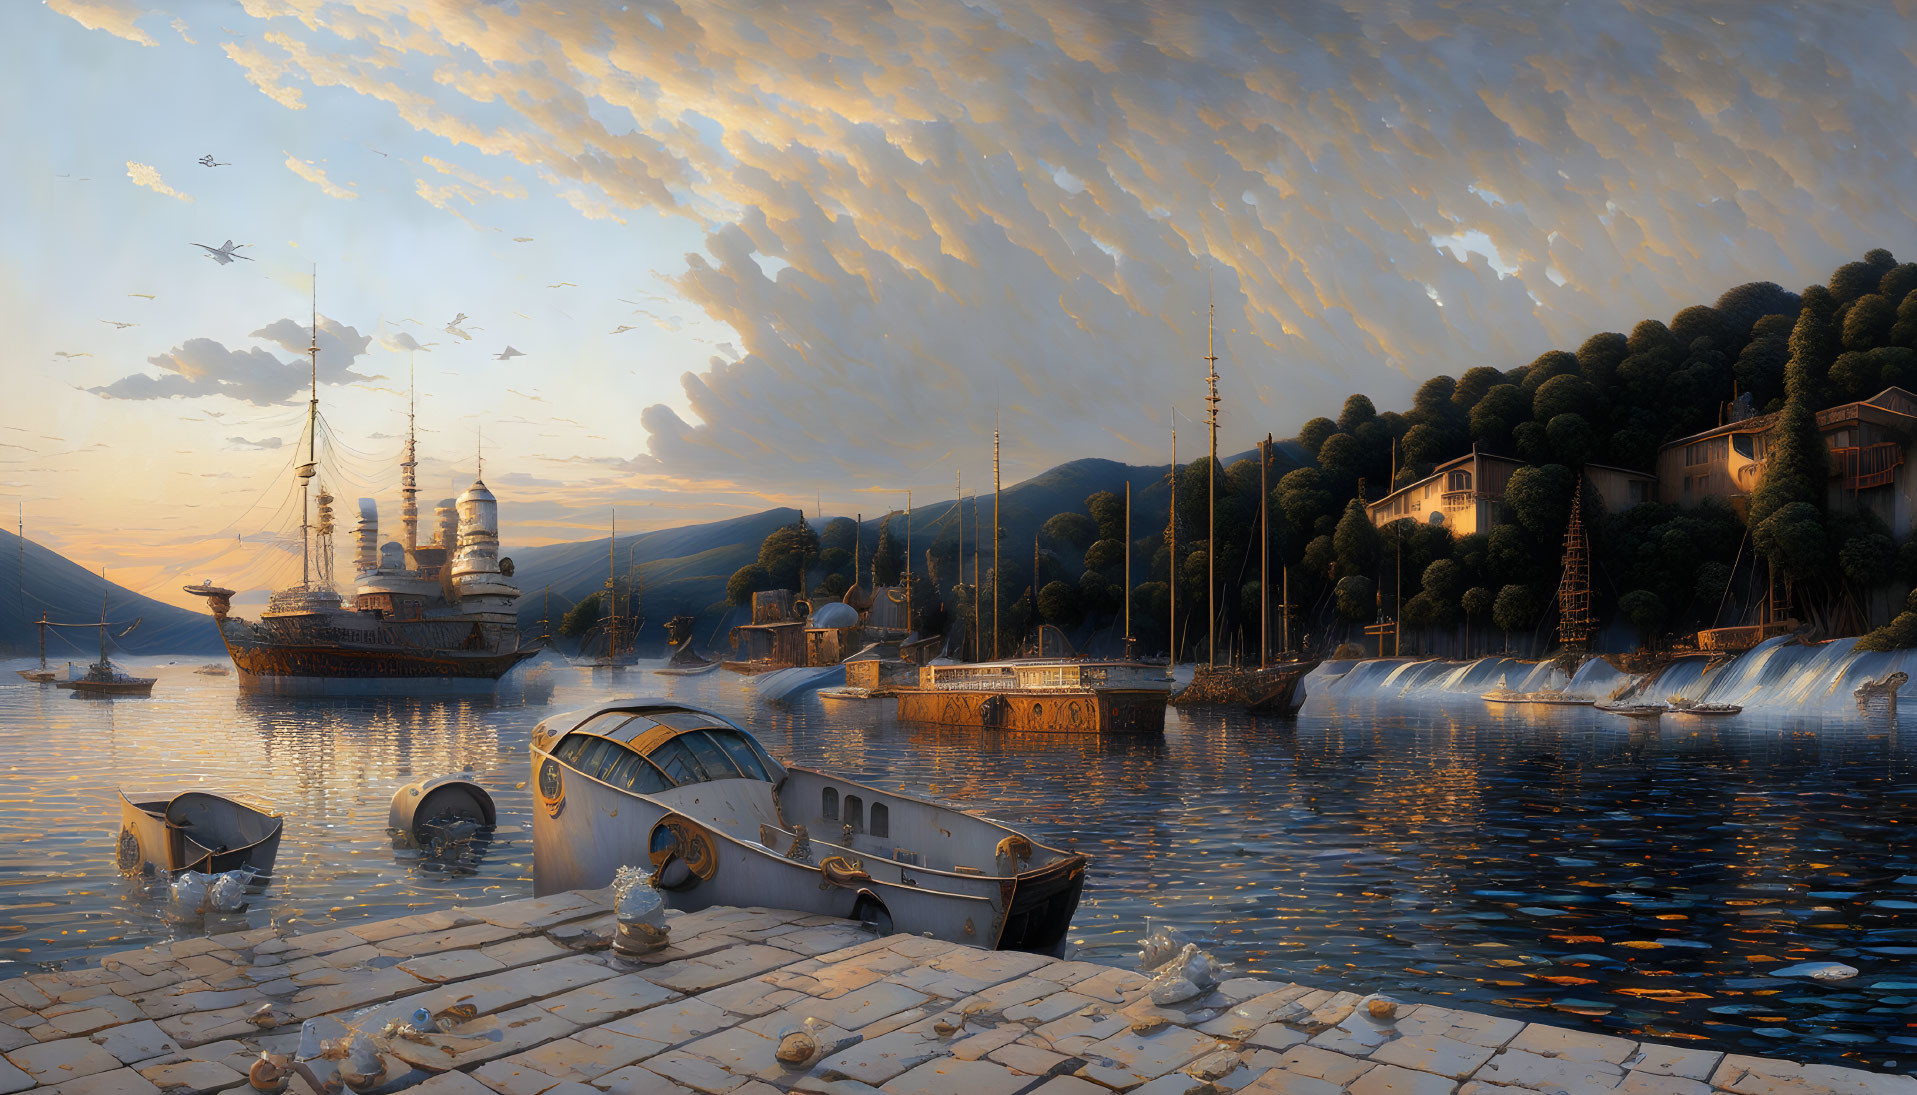 Scenic sunset harbor view with boats and old-world architecture